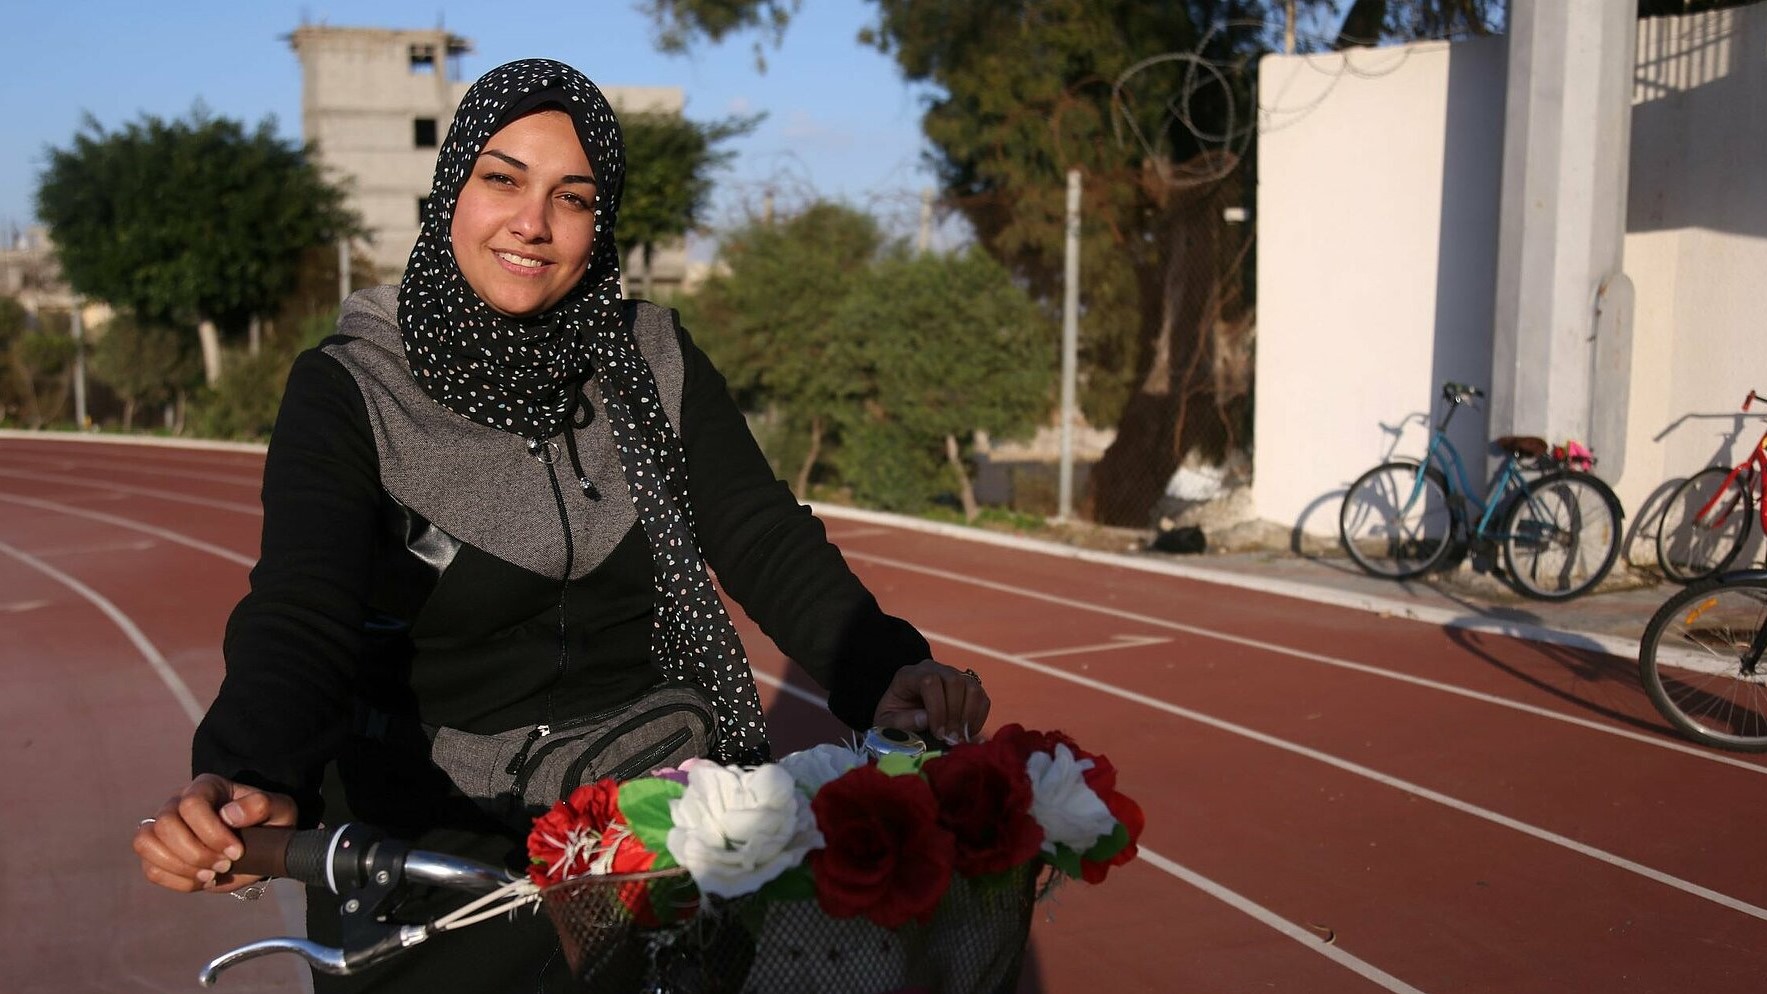 Founder of "Pink Bike", Rania always wanted to ride a bicycle, now she founded a place where other girls and women can make their wish come true (photo: Samar Abou Elouf)